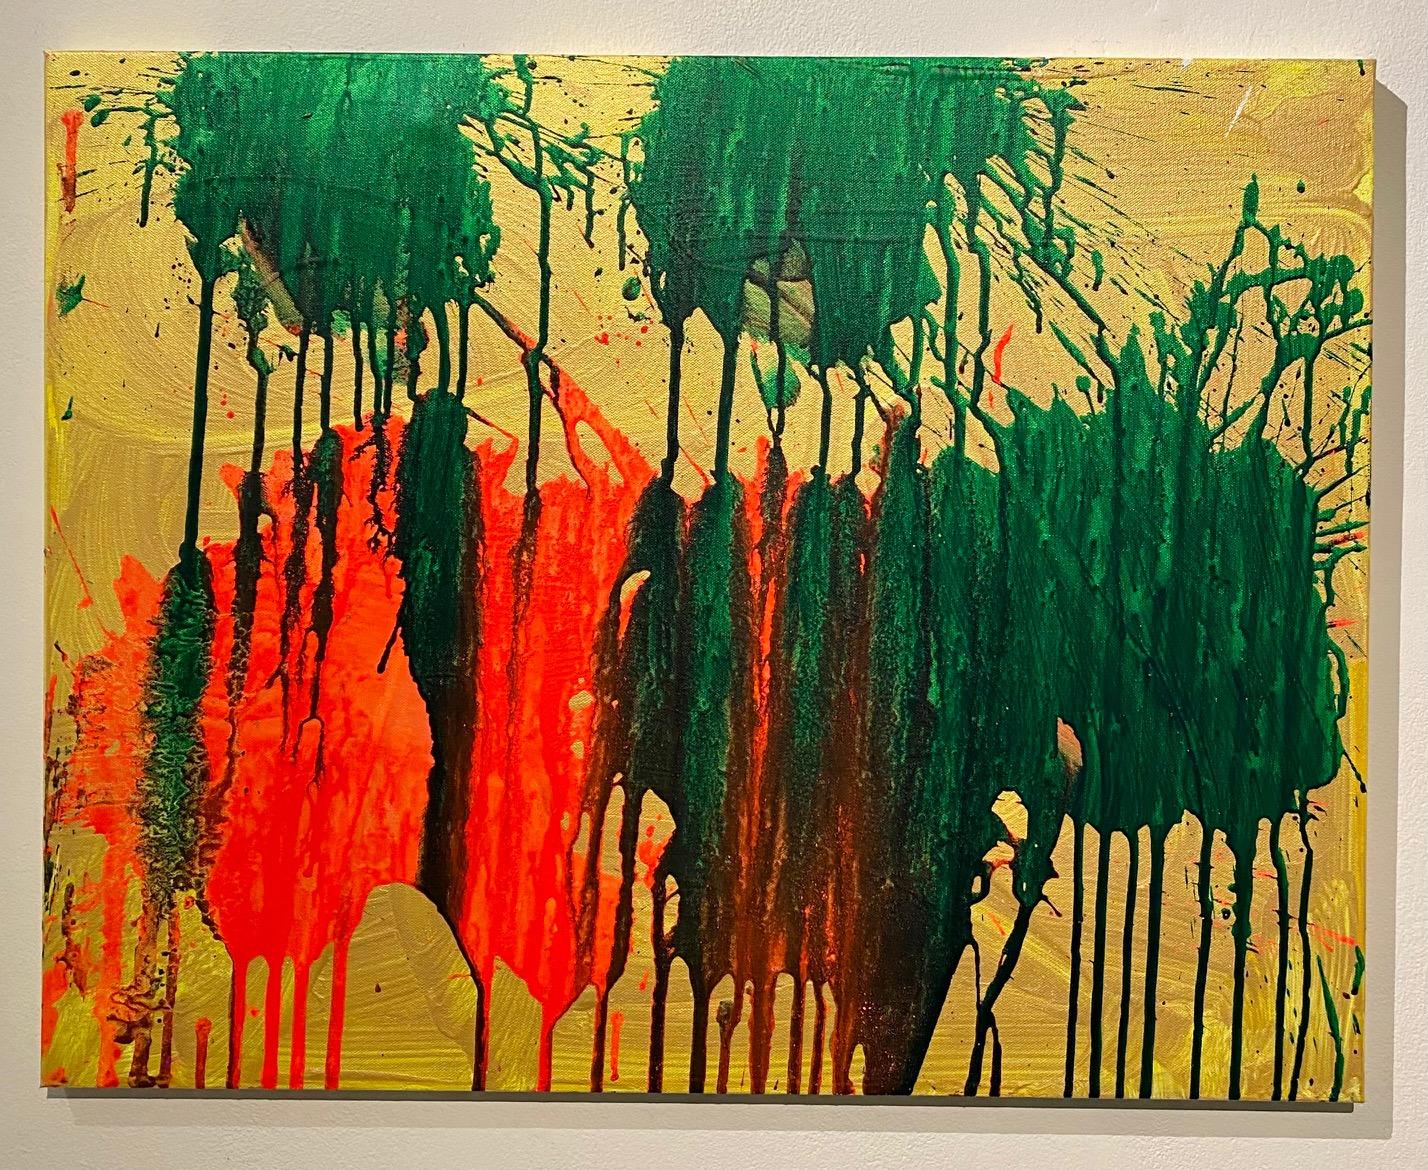 Ushio Shinohara Abstract Painting - "Red and Green on Gold, " Acrylic on Canvas - Abstract Boxing painting